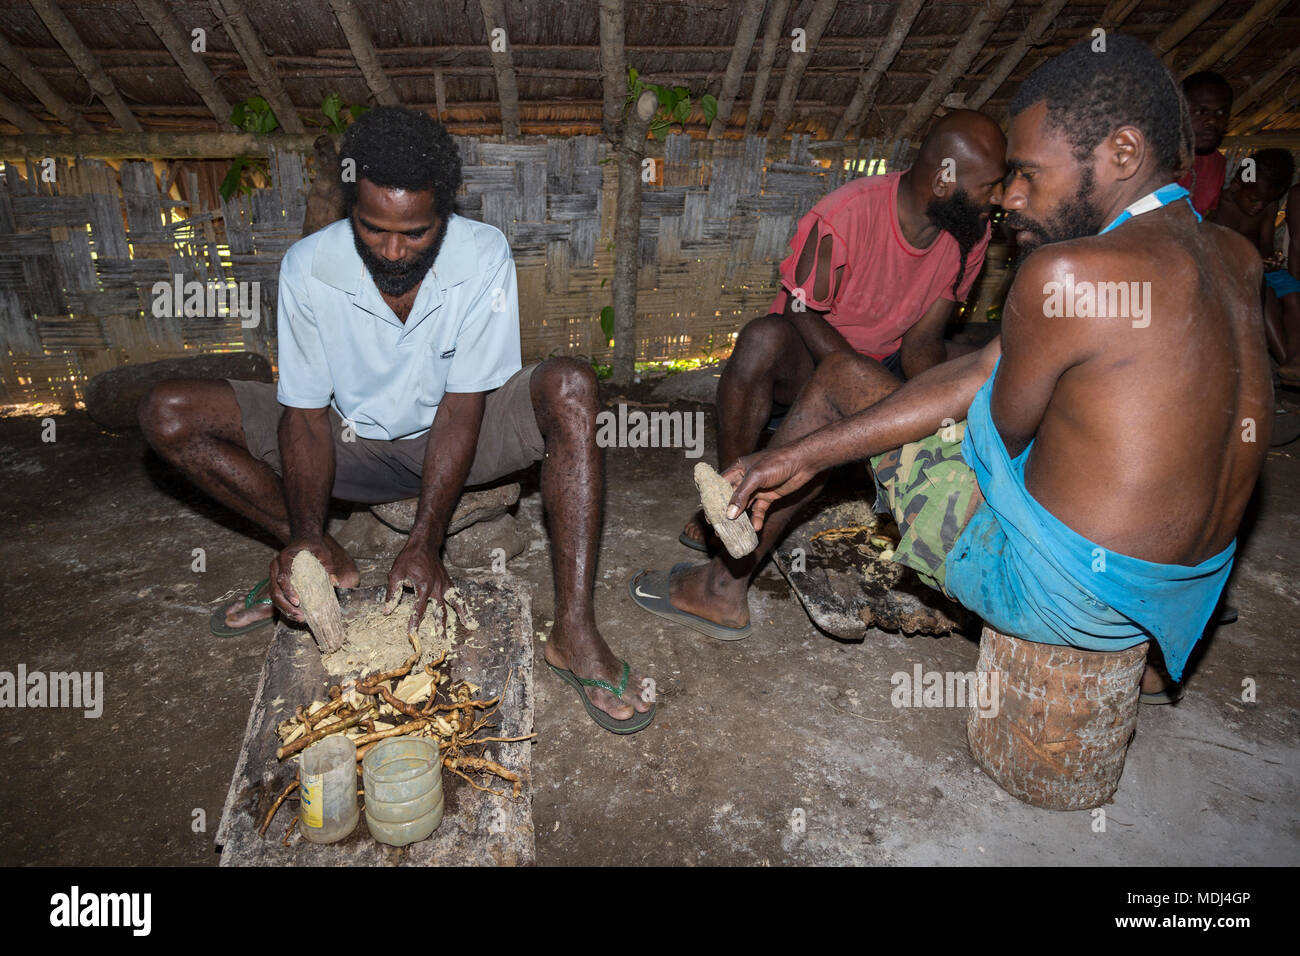 Pentecost, Republic of Vanuatu, July 21, 2014: Indigenous men participate in traditional Kava Ceremony. The consumption of the drink is a form of welc Stock Photo